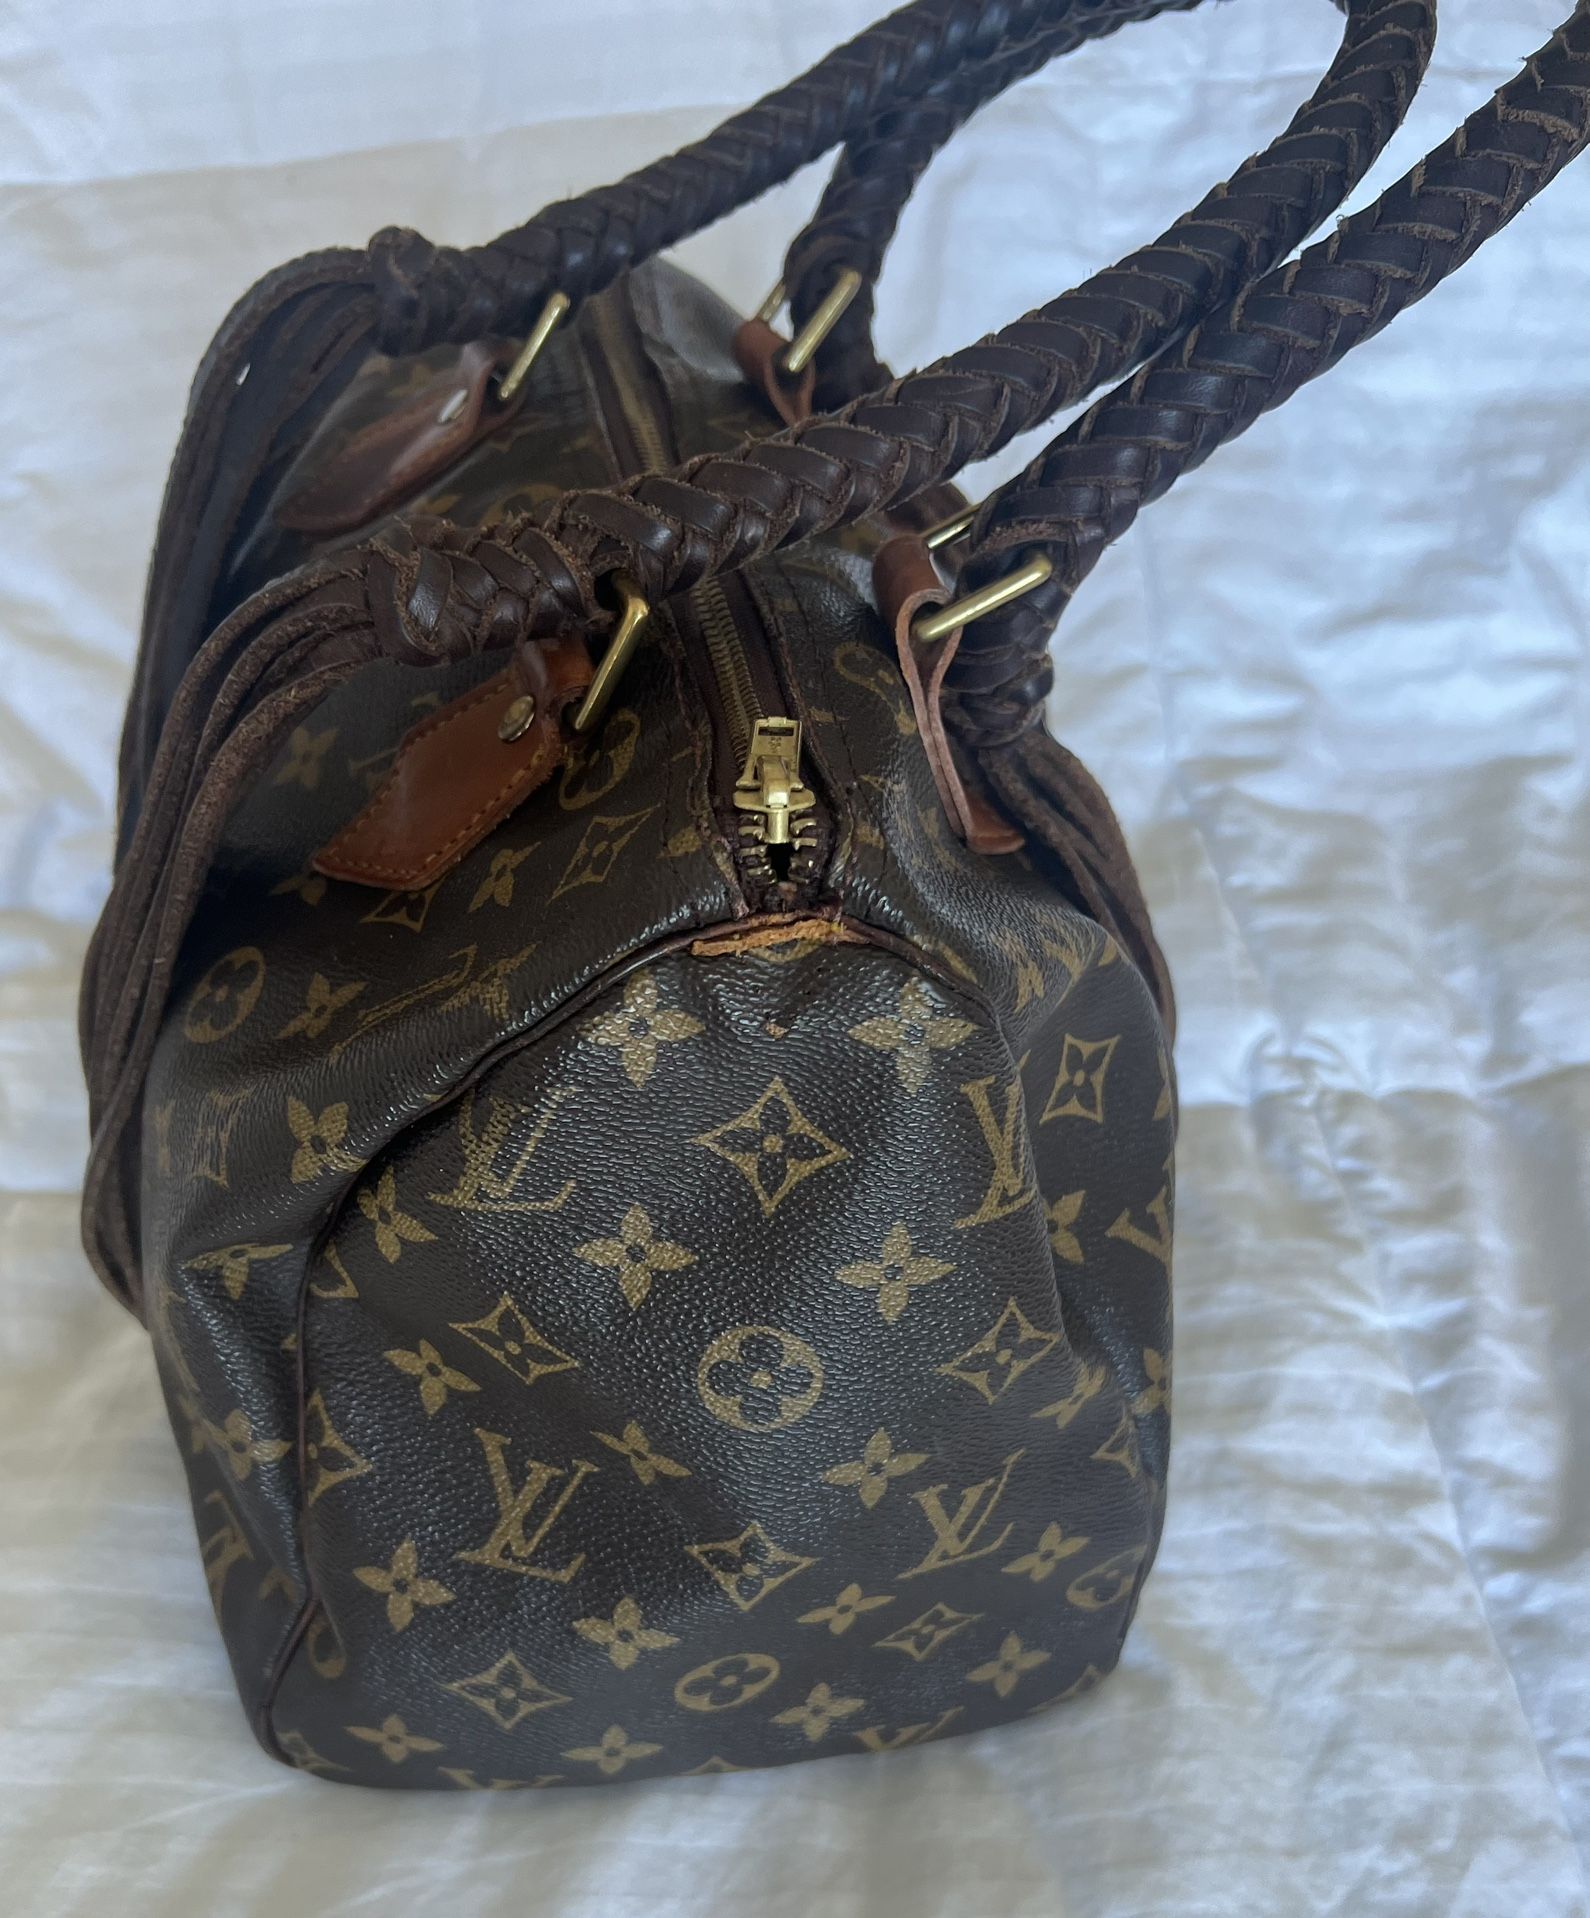 Auth Louis Vuitton Bag - Large Noe Upcycled Fringe LV Purse in Bohemian /  Southwest / Festival Style for Sale in Northlake, IL - OfferUp